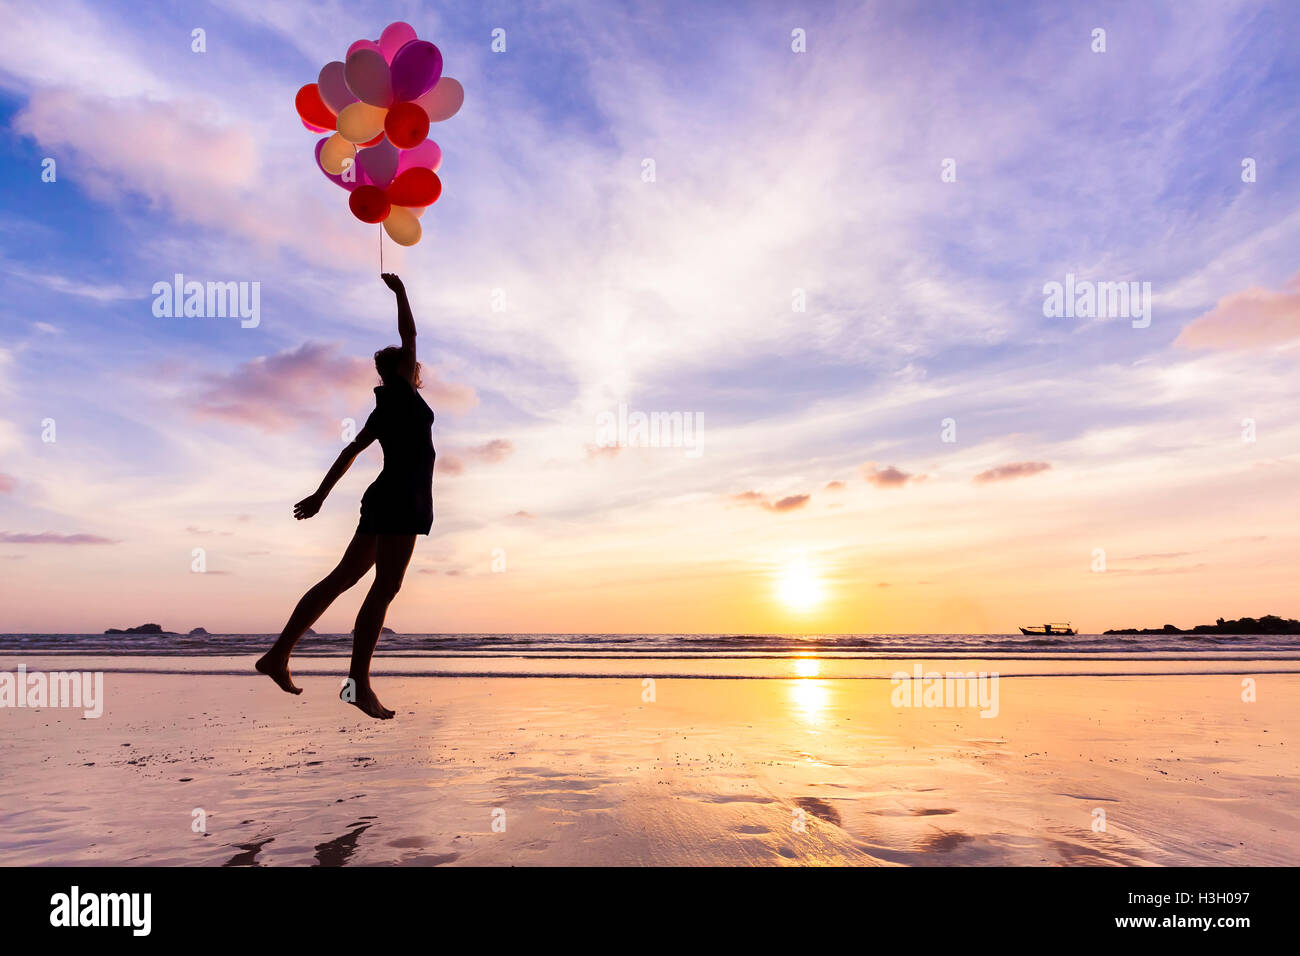 Woman in a happy dream flying in the sky lifted by helium balloons Stock Photo